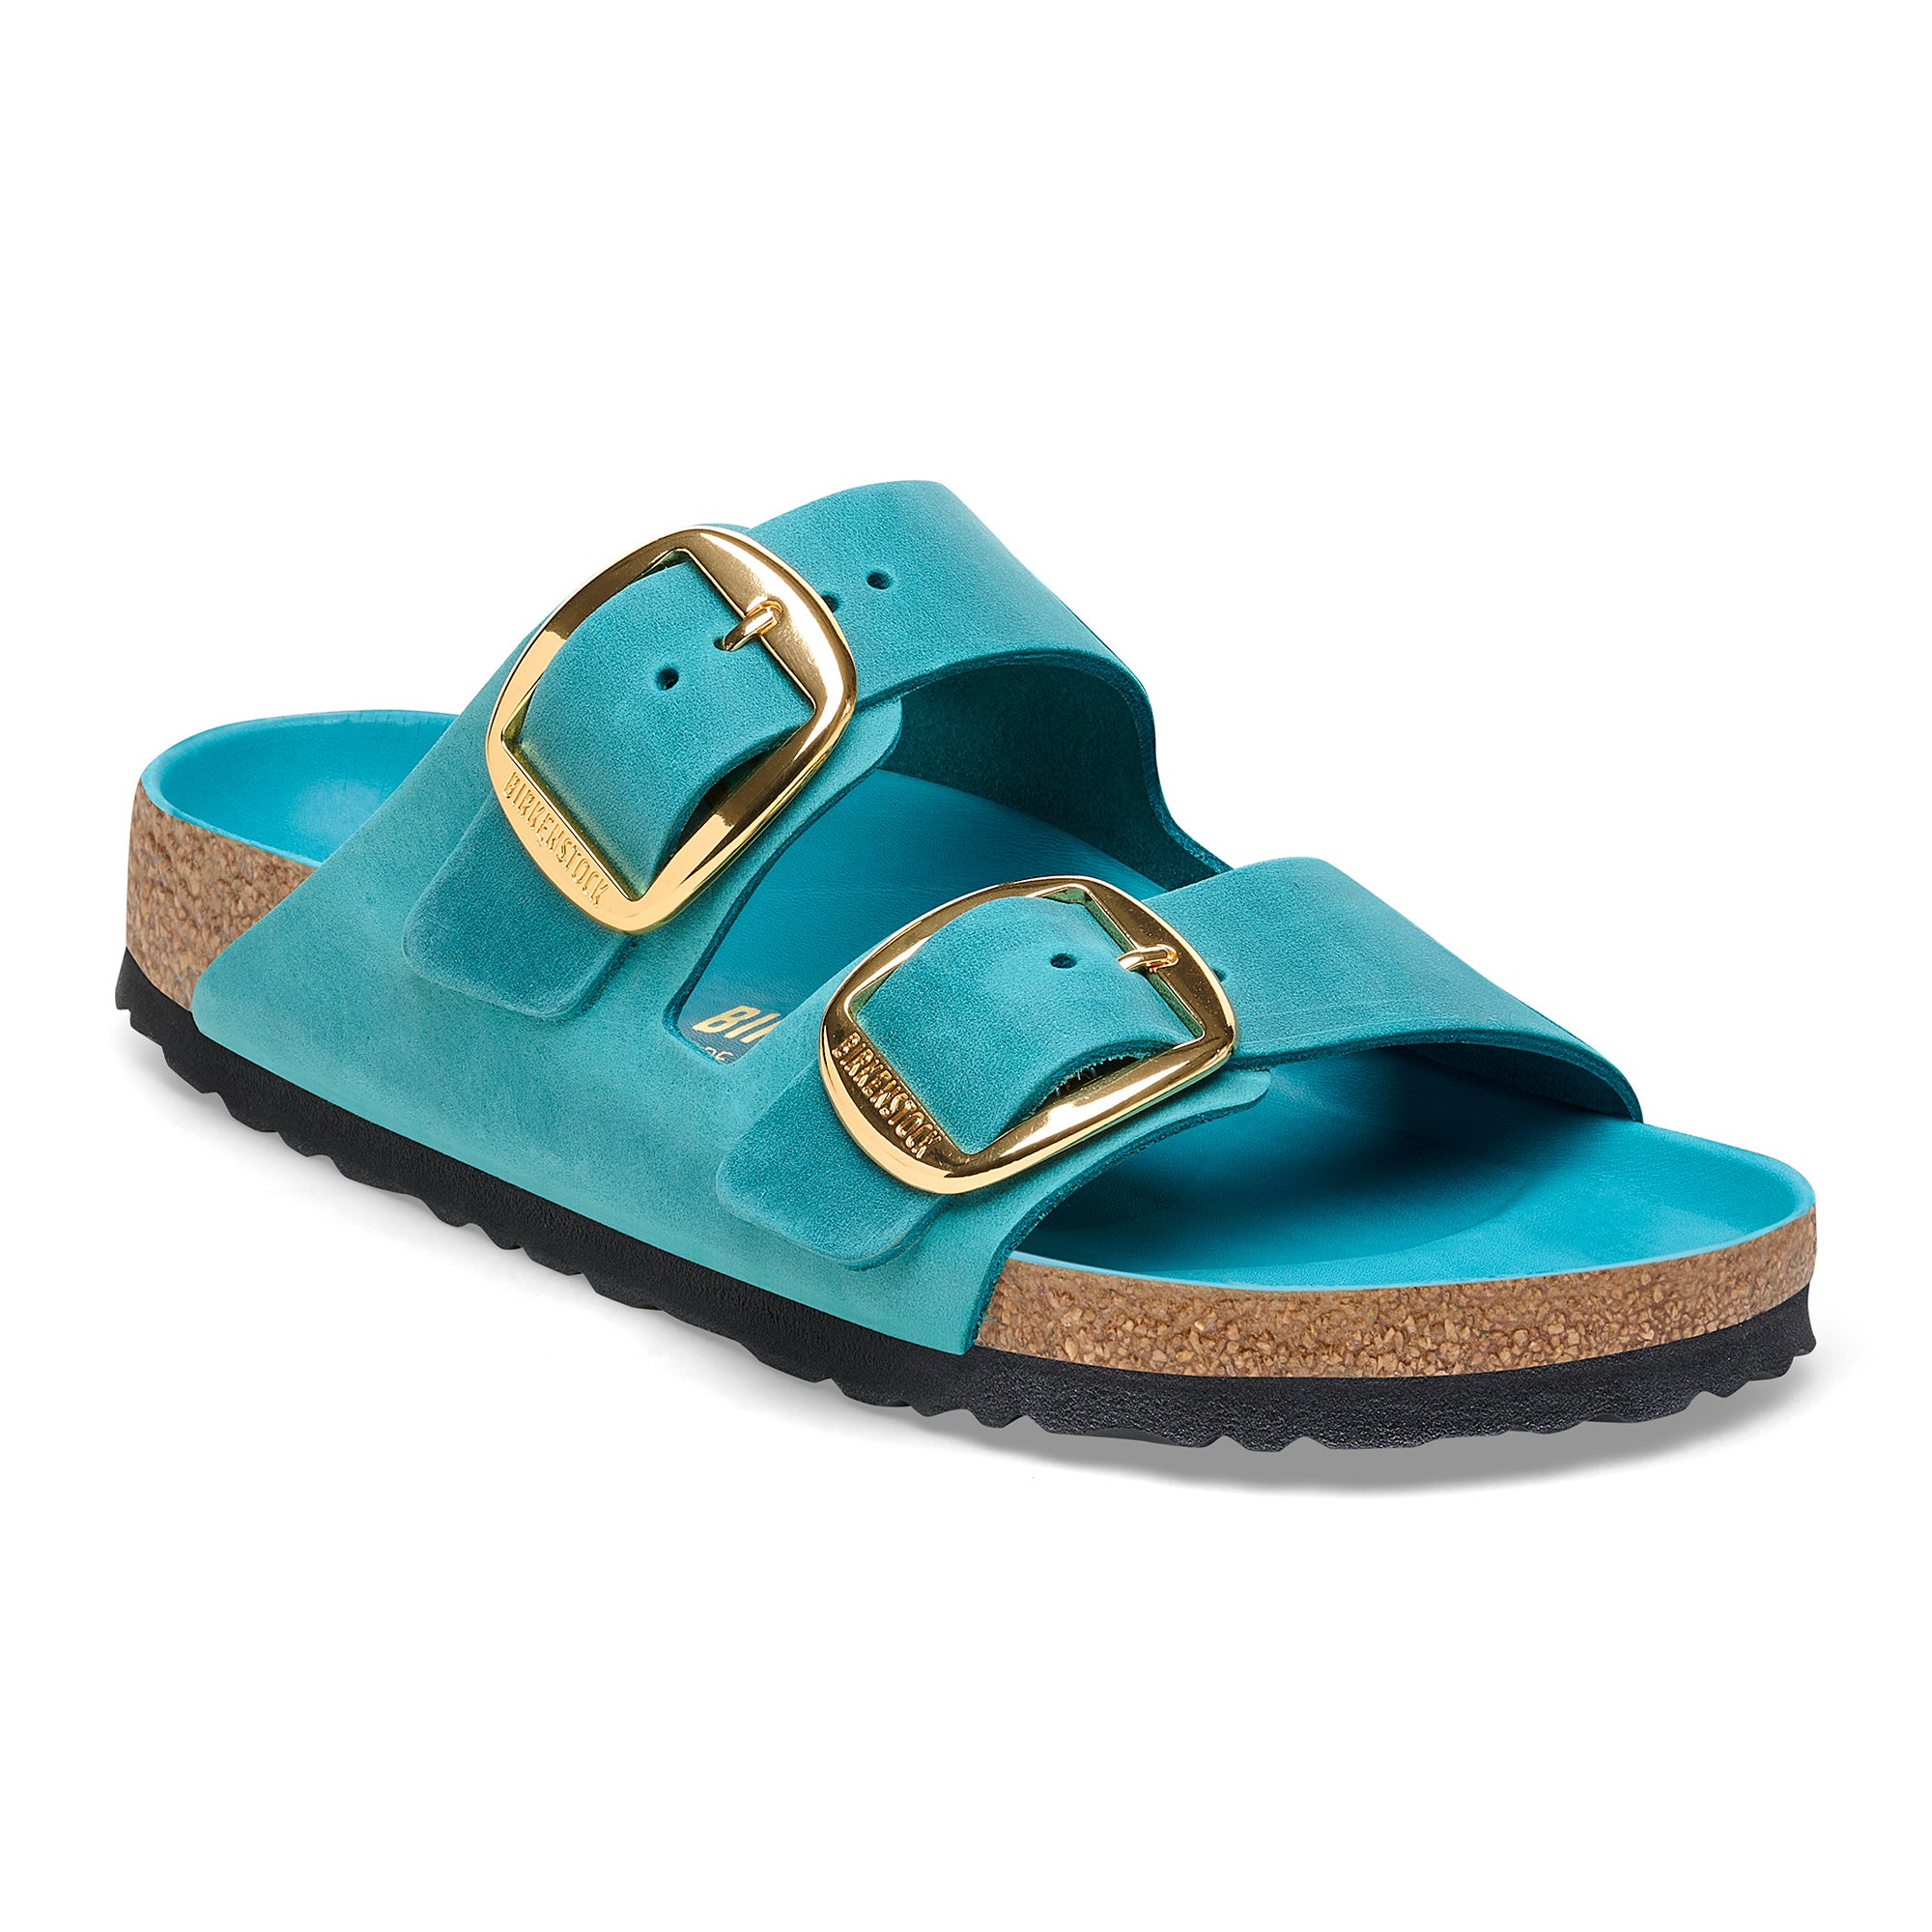 Birkenstock Limited Edition Arizona Big Buckle biscay bay oiled leather